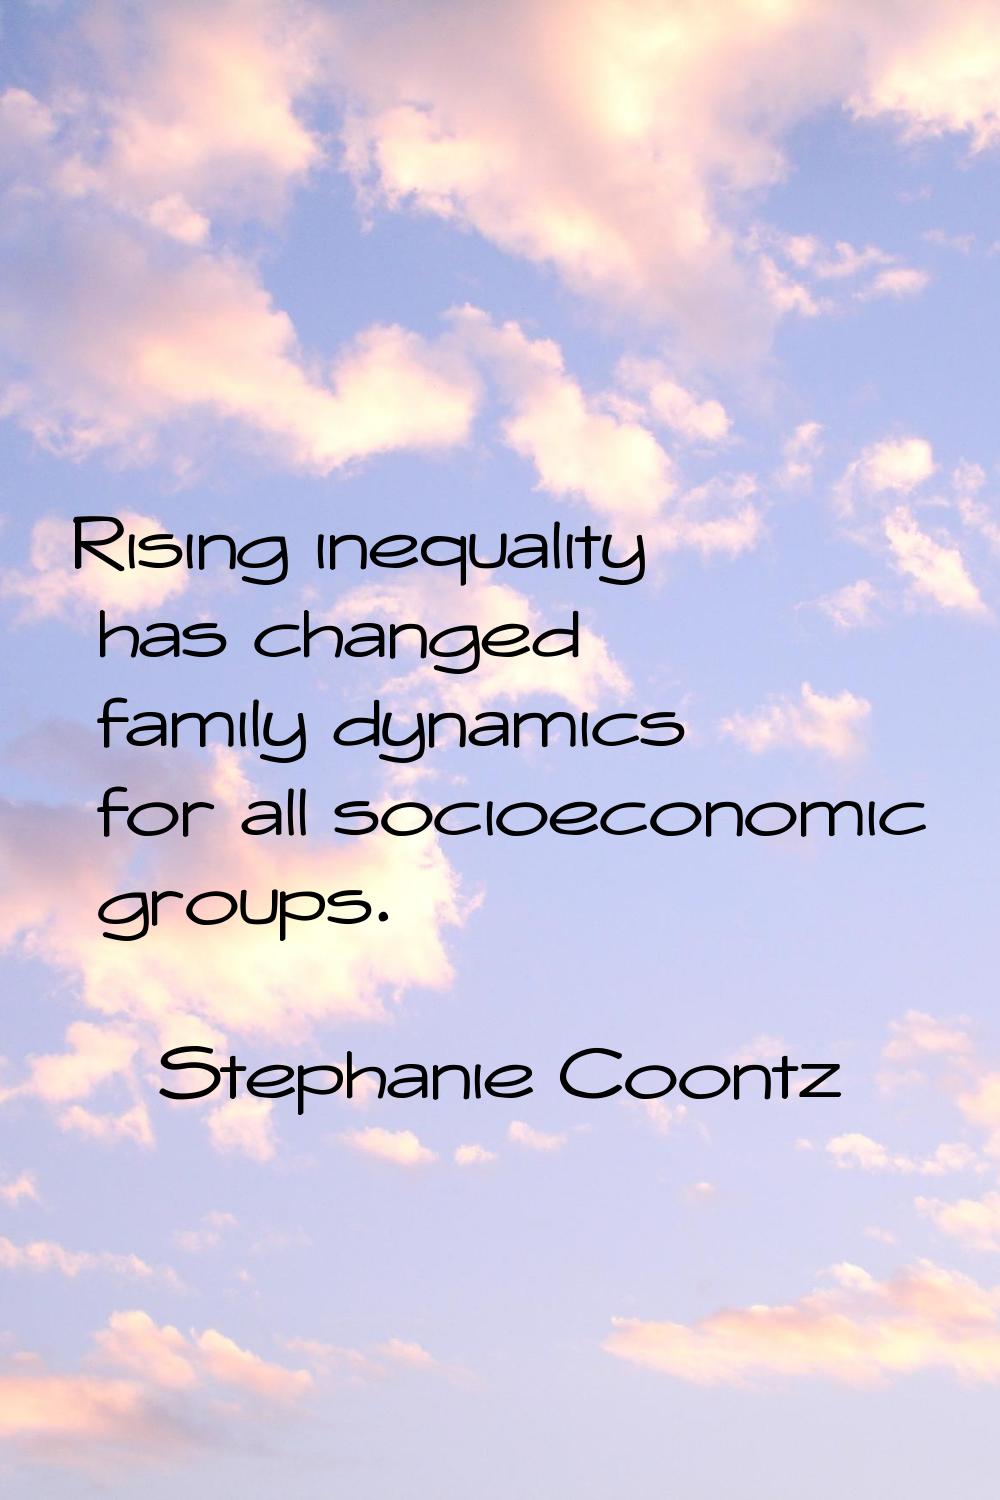 Rising inequality has changed family dynamics for all socioeconomic groups.